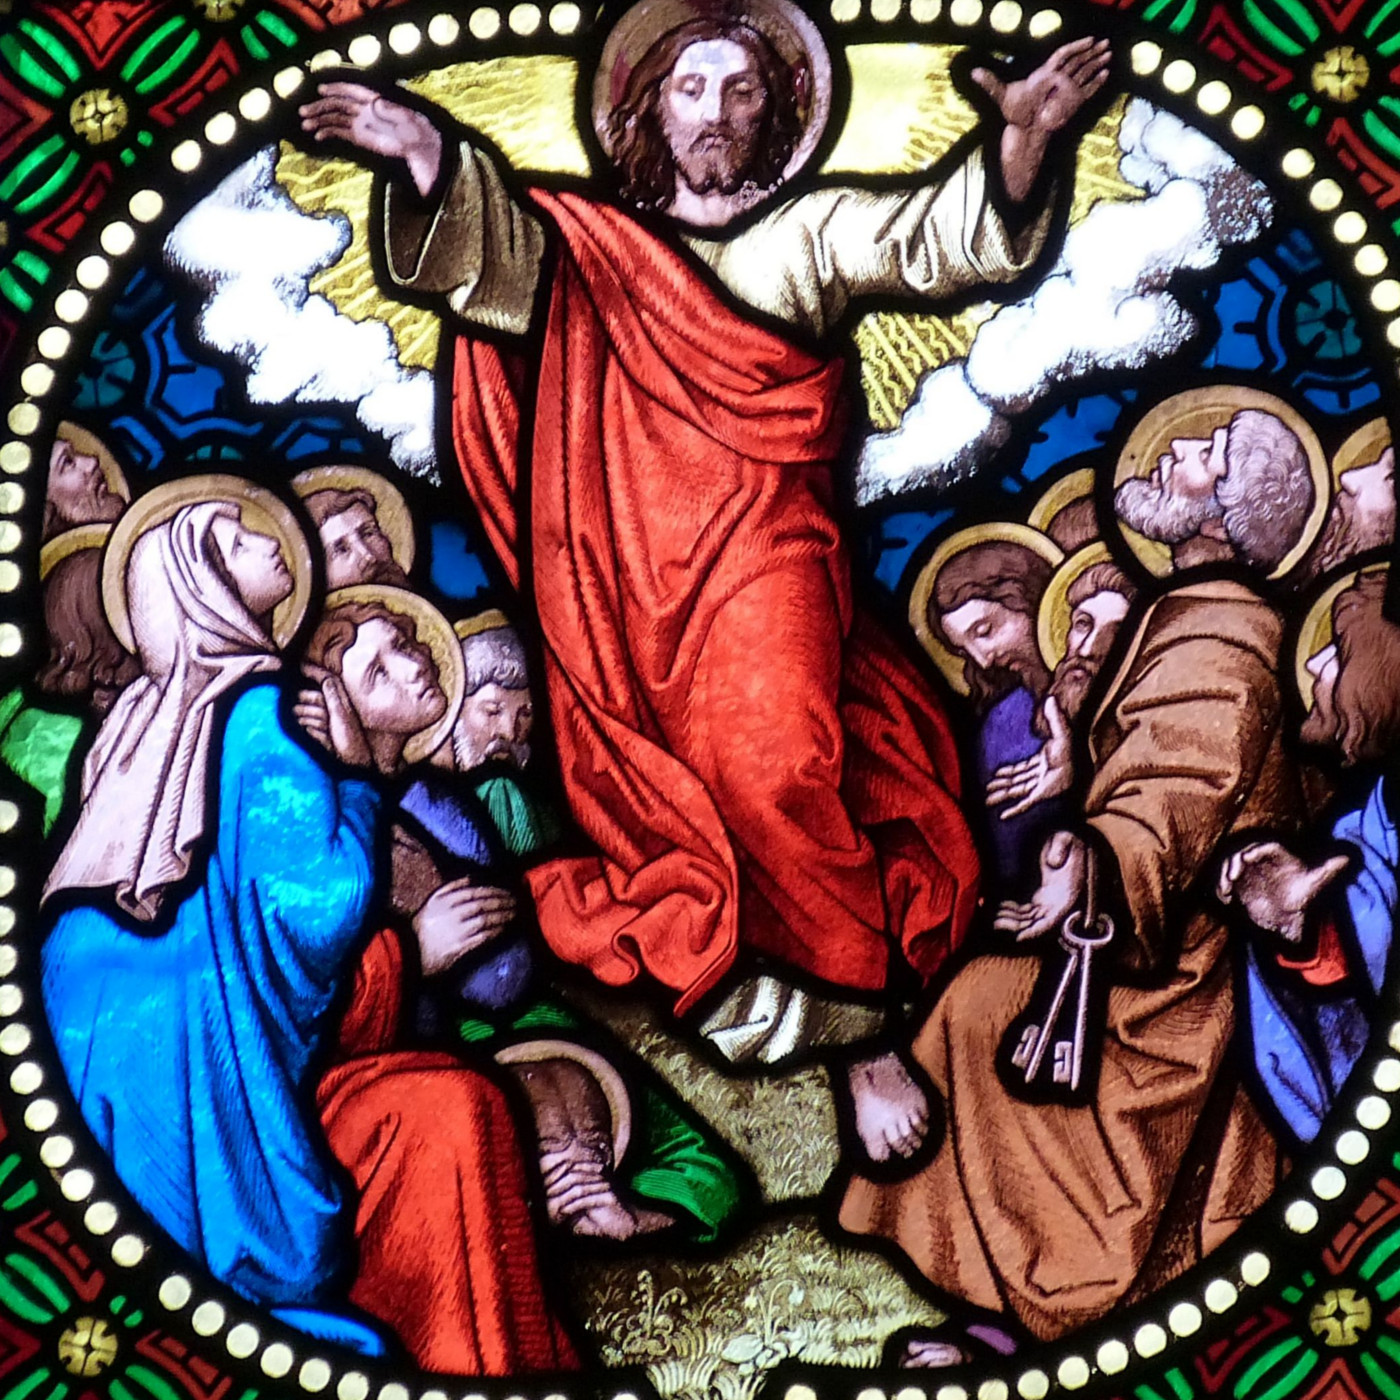 The Ascension of the Lord